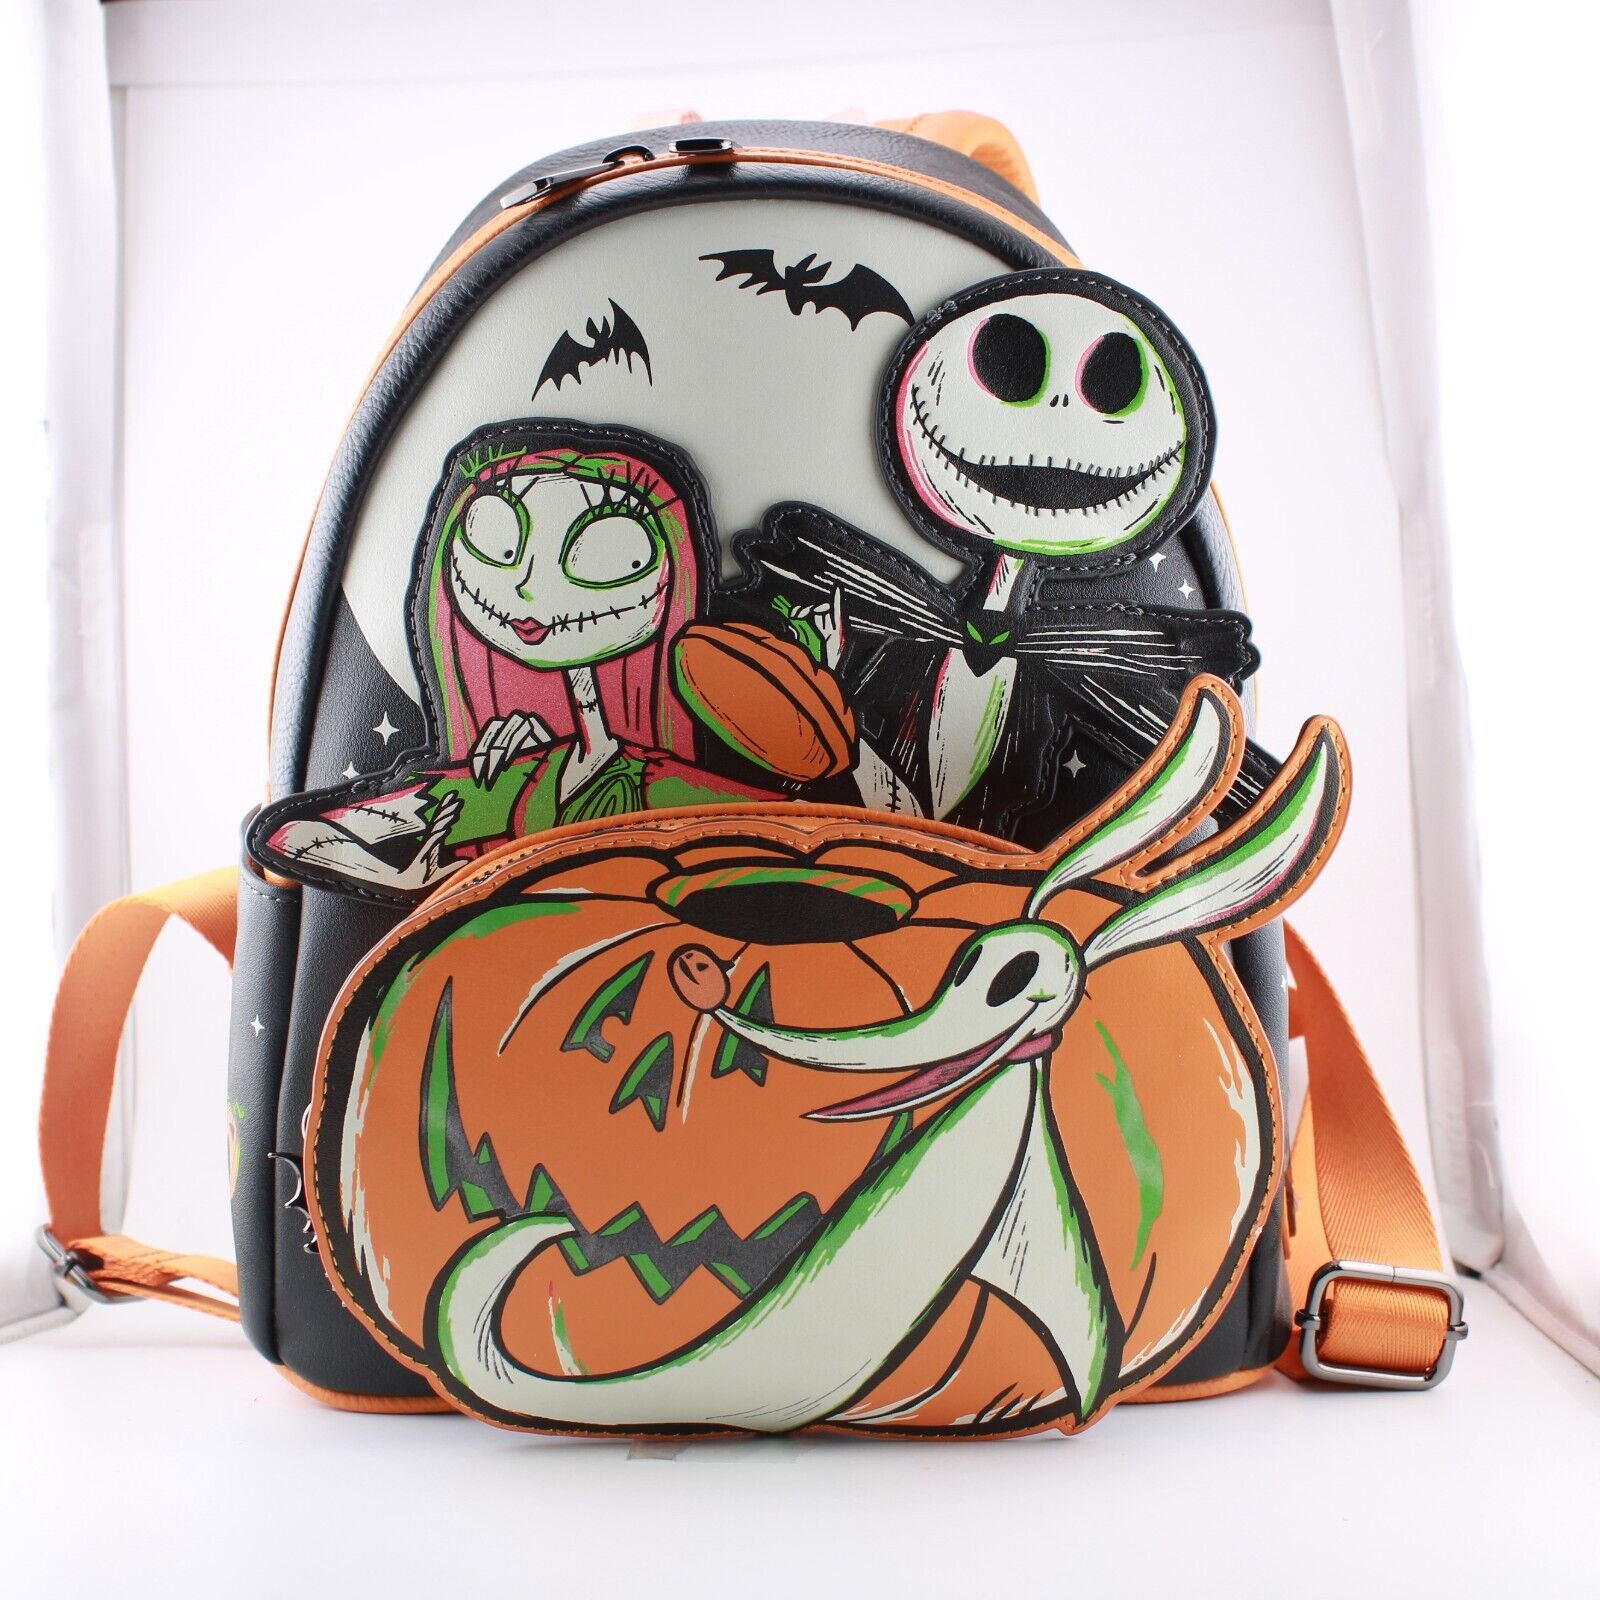 Loungefly Disney The Nightmare Before Christmas Glow-in-the-Dark Mini-Backpack